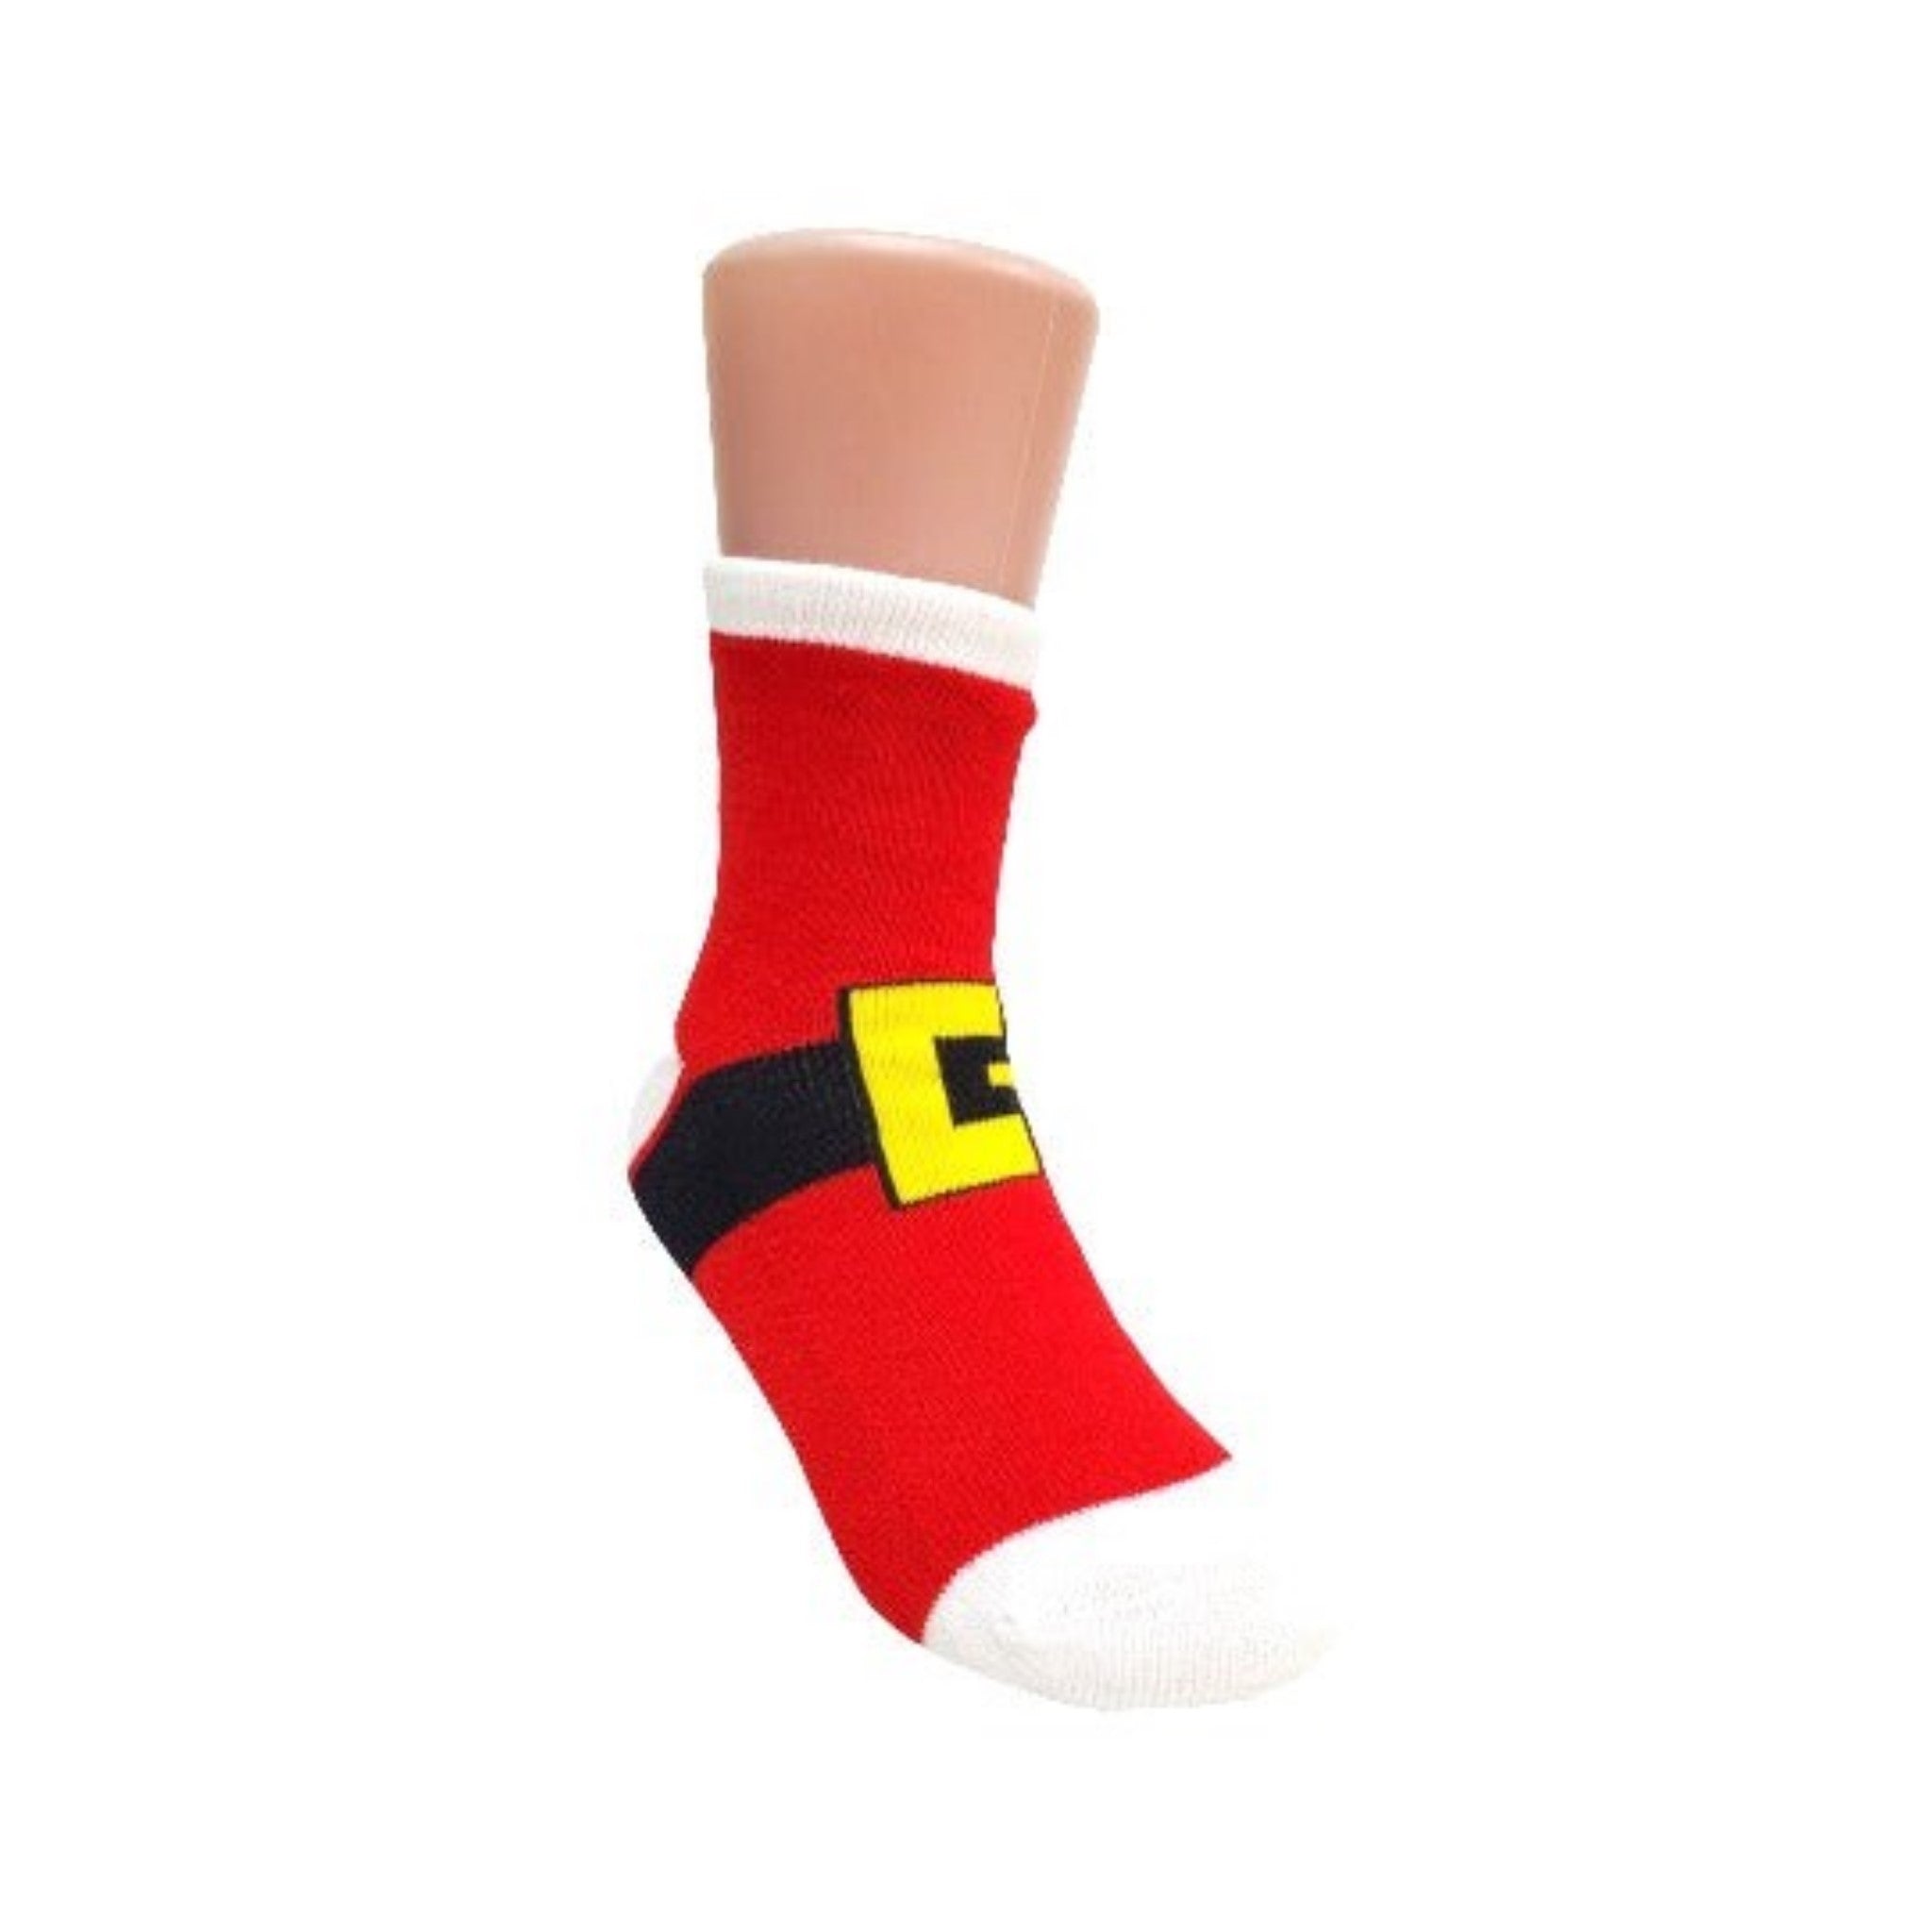 Santa's Belt Socks for Kids (Ages 6 mo. to 7 yr)